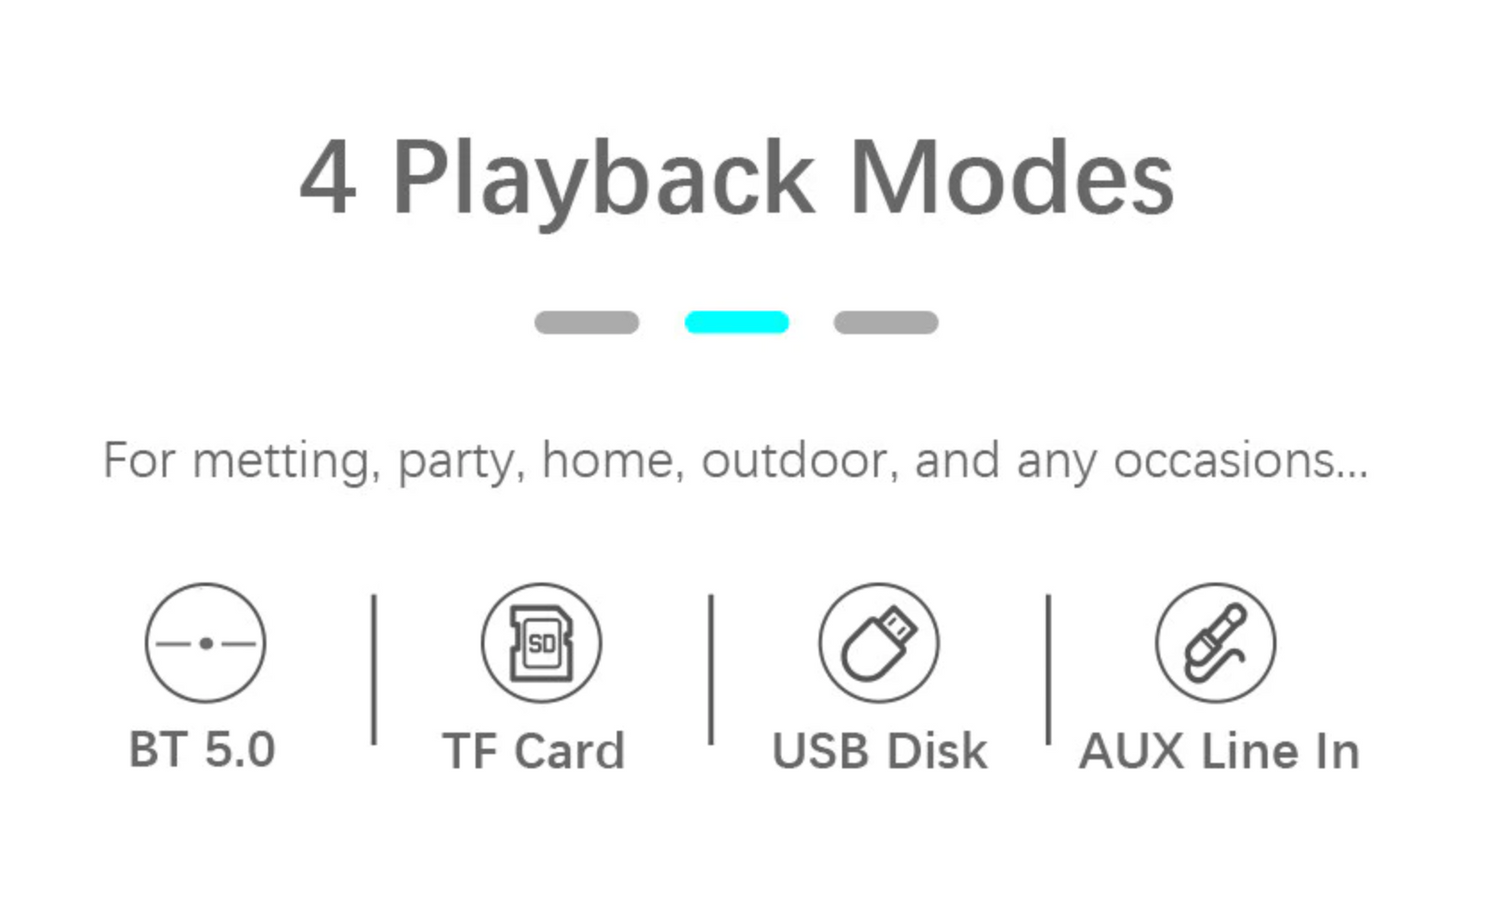 Image for list of music playback modes for the solar powered outdoor bluetooth speaker. It can play music from smart phone via bluetooth SD card, USB disk and AUX cable.